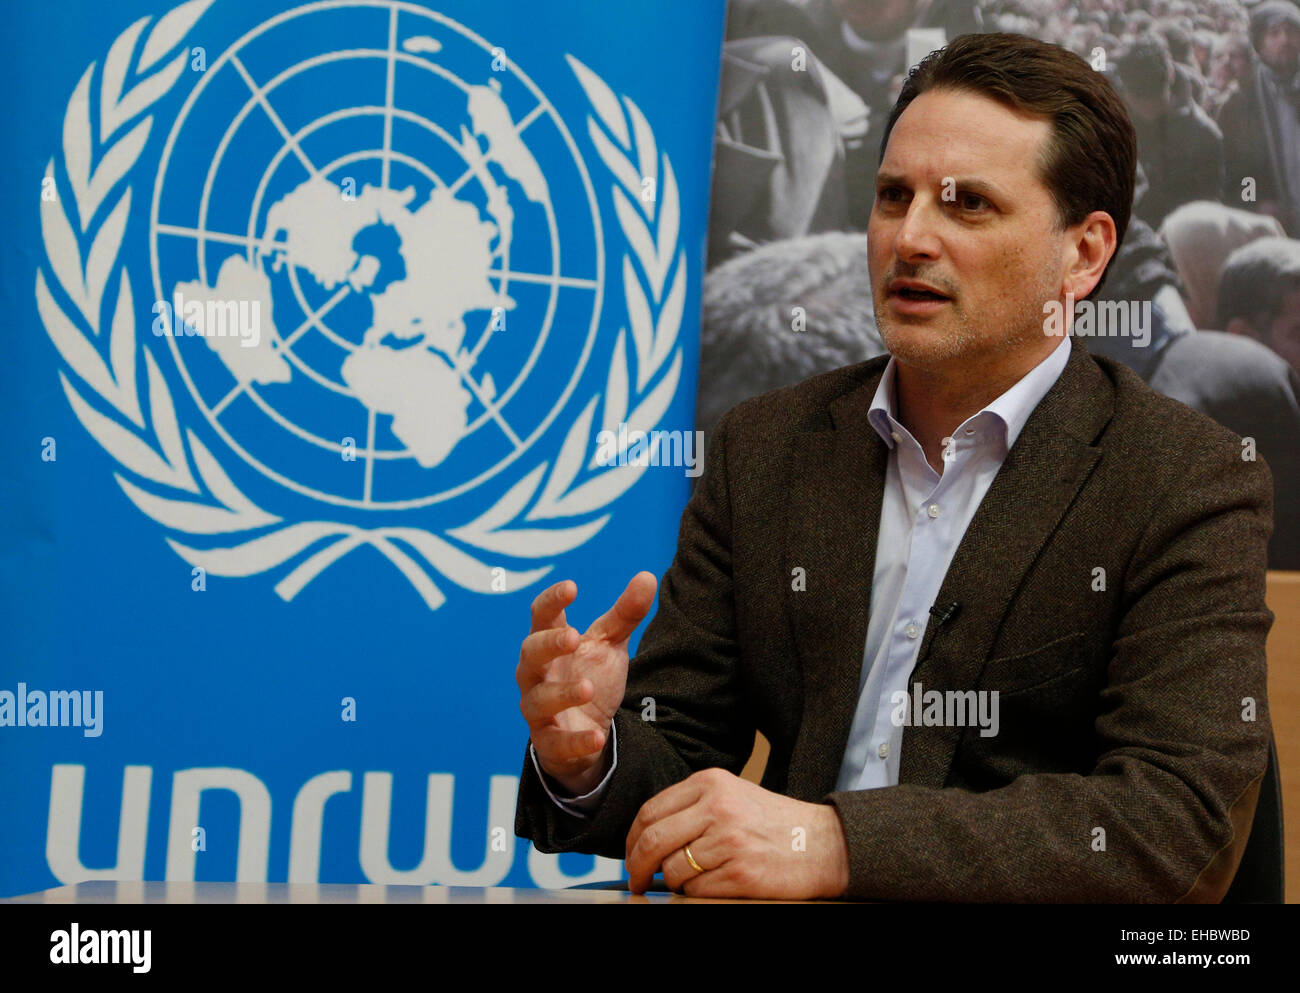 Damascus. 11th Mar, 2015. Pierre Krahenbuhl, United Nations Relief and Works Agency (UNRWA) Commissioner-General speaks during an interview in Damascus on March 11, 2015. He said the situation of the Palestinian refugees in Syria is critical amid insufficient assistance for the afflicted people. © Bassem Tellawi/Xinhua/Alamy Live News Stock Photo